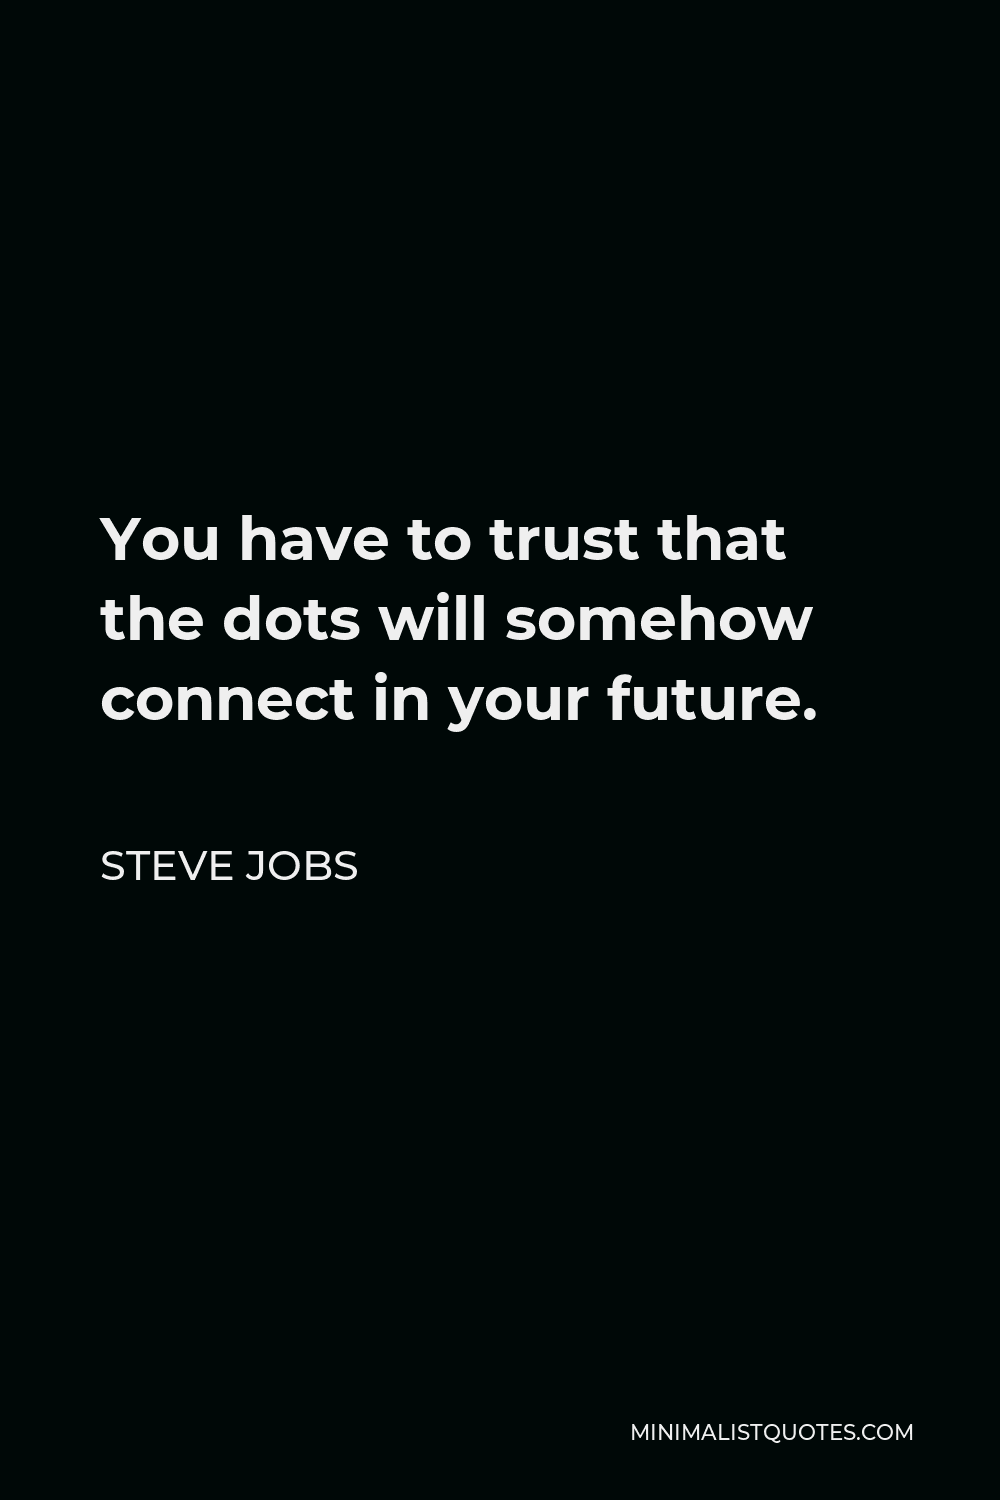 Steve Jobs Quote - You have to trust that the dots will somehow connect in your future.